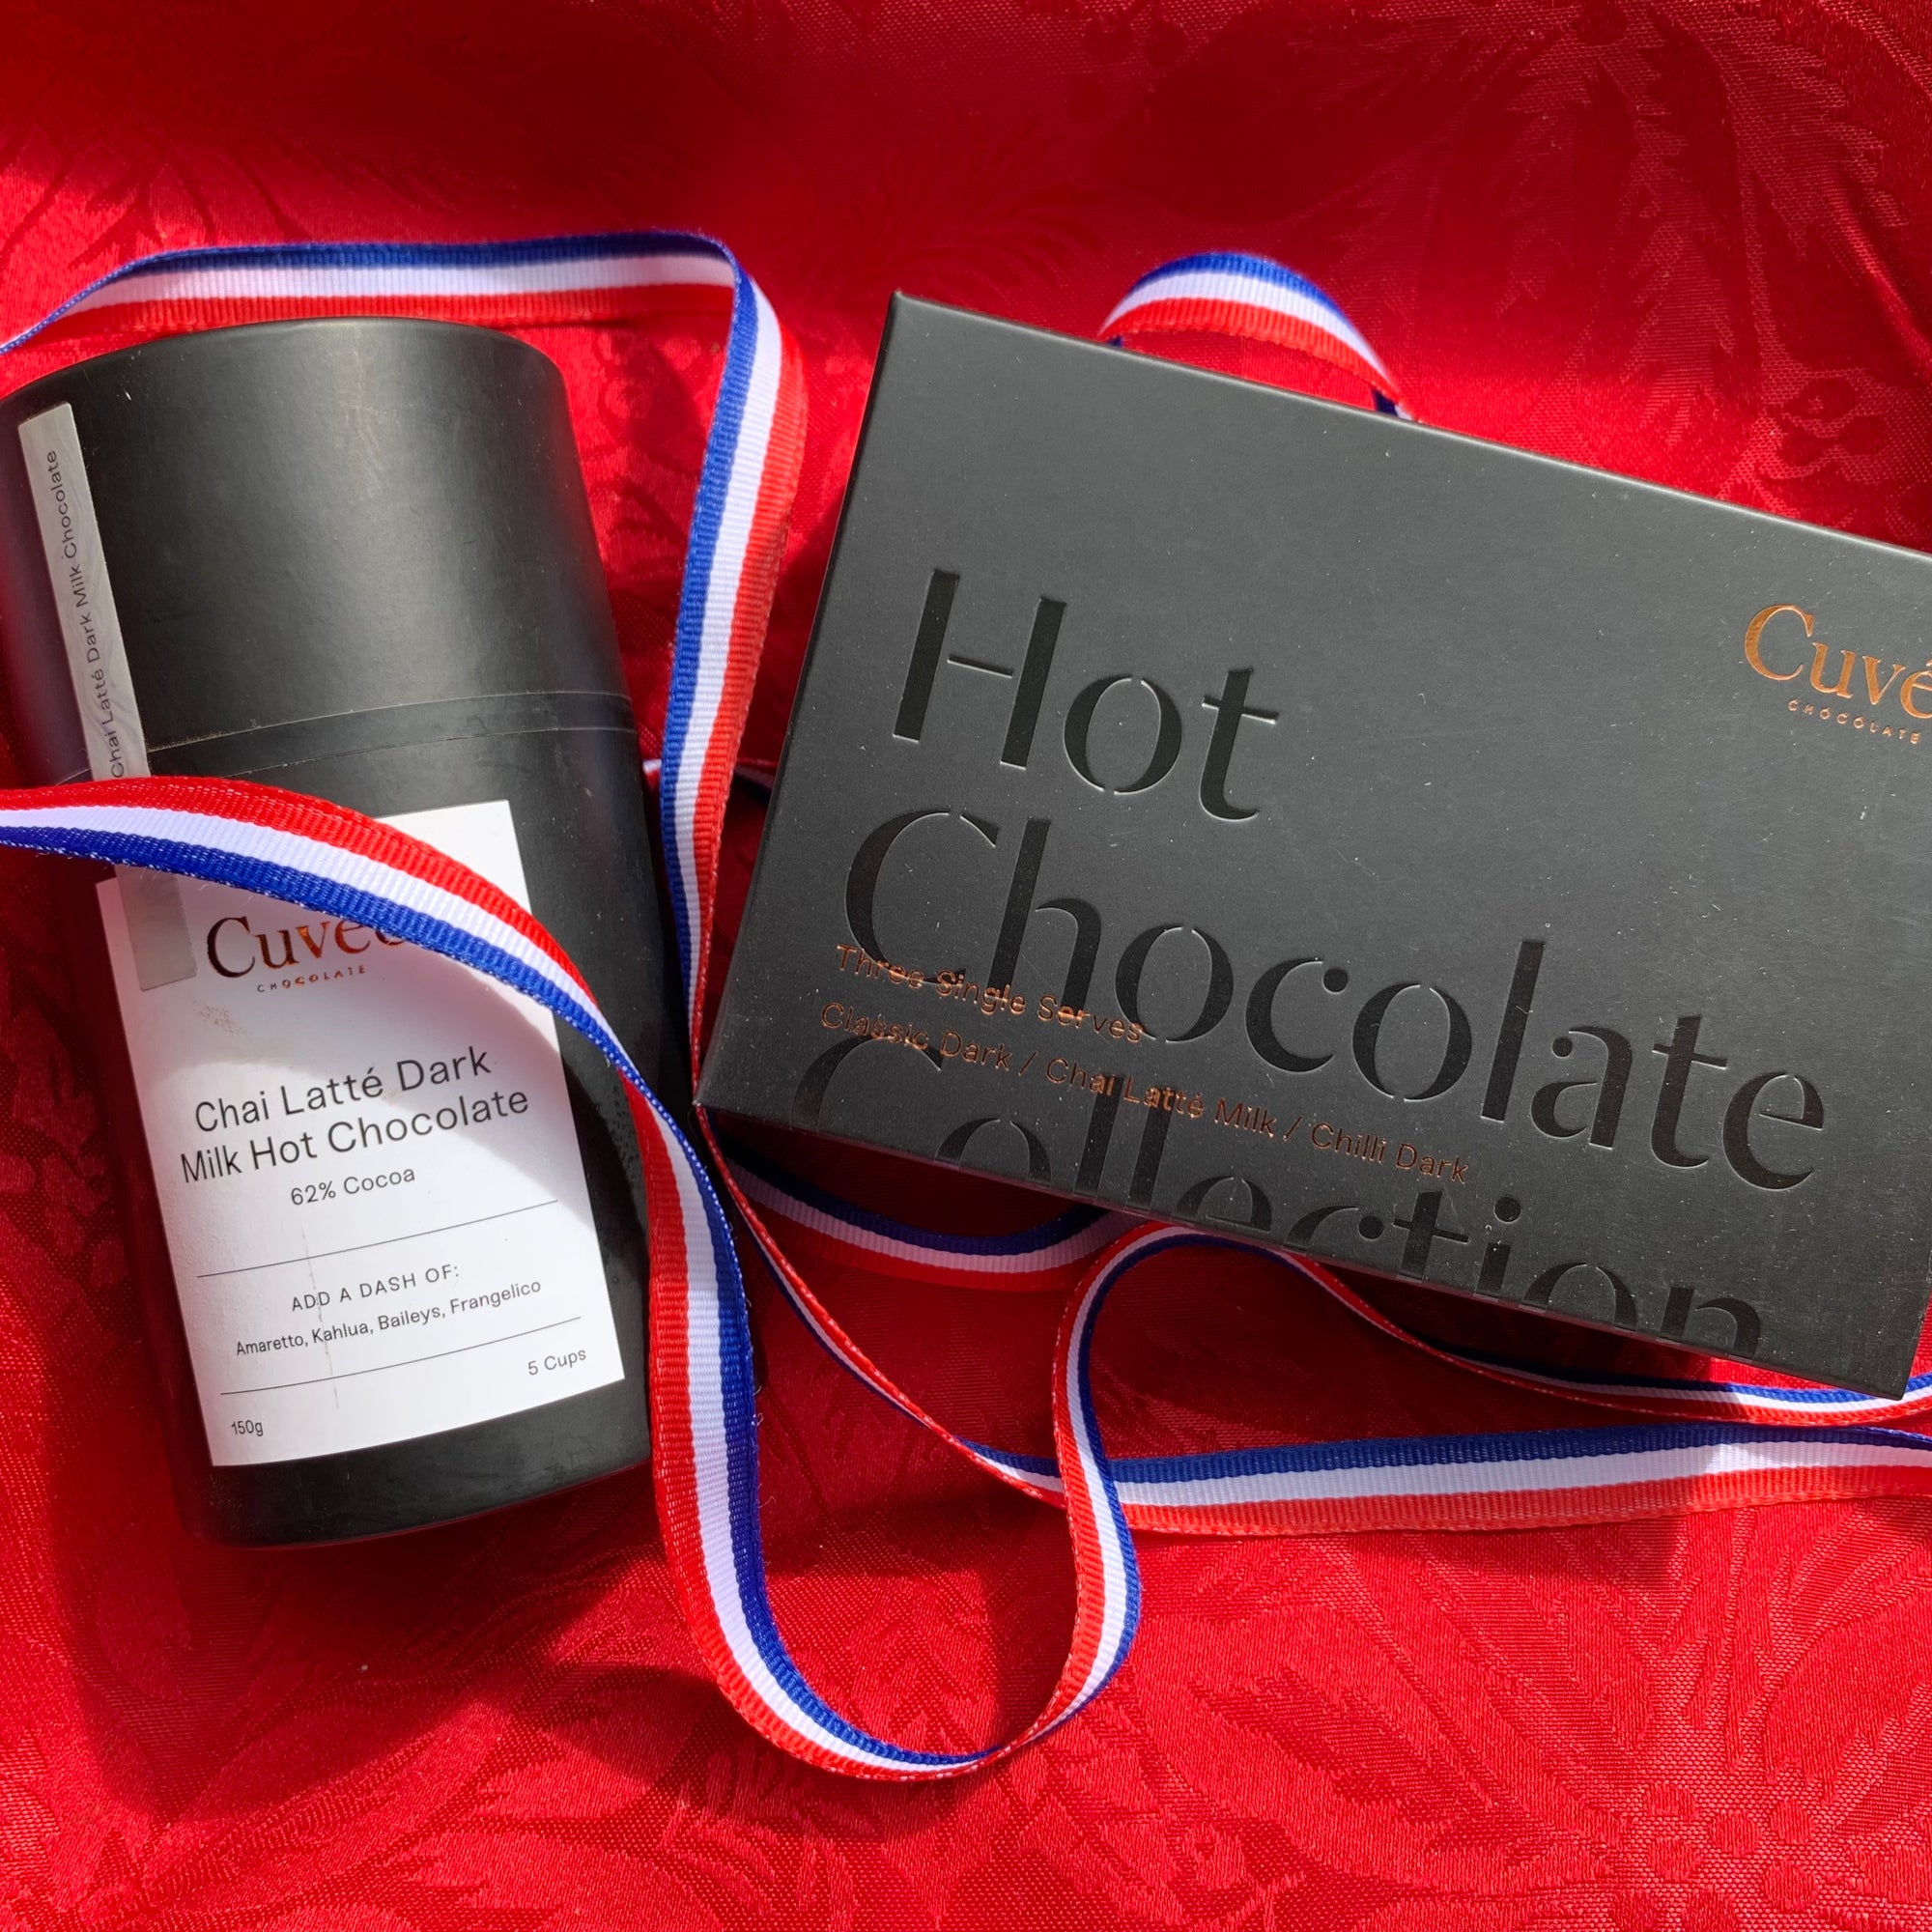 Cuvee Hot Chocolate Collection